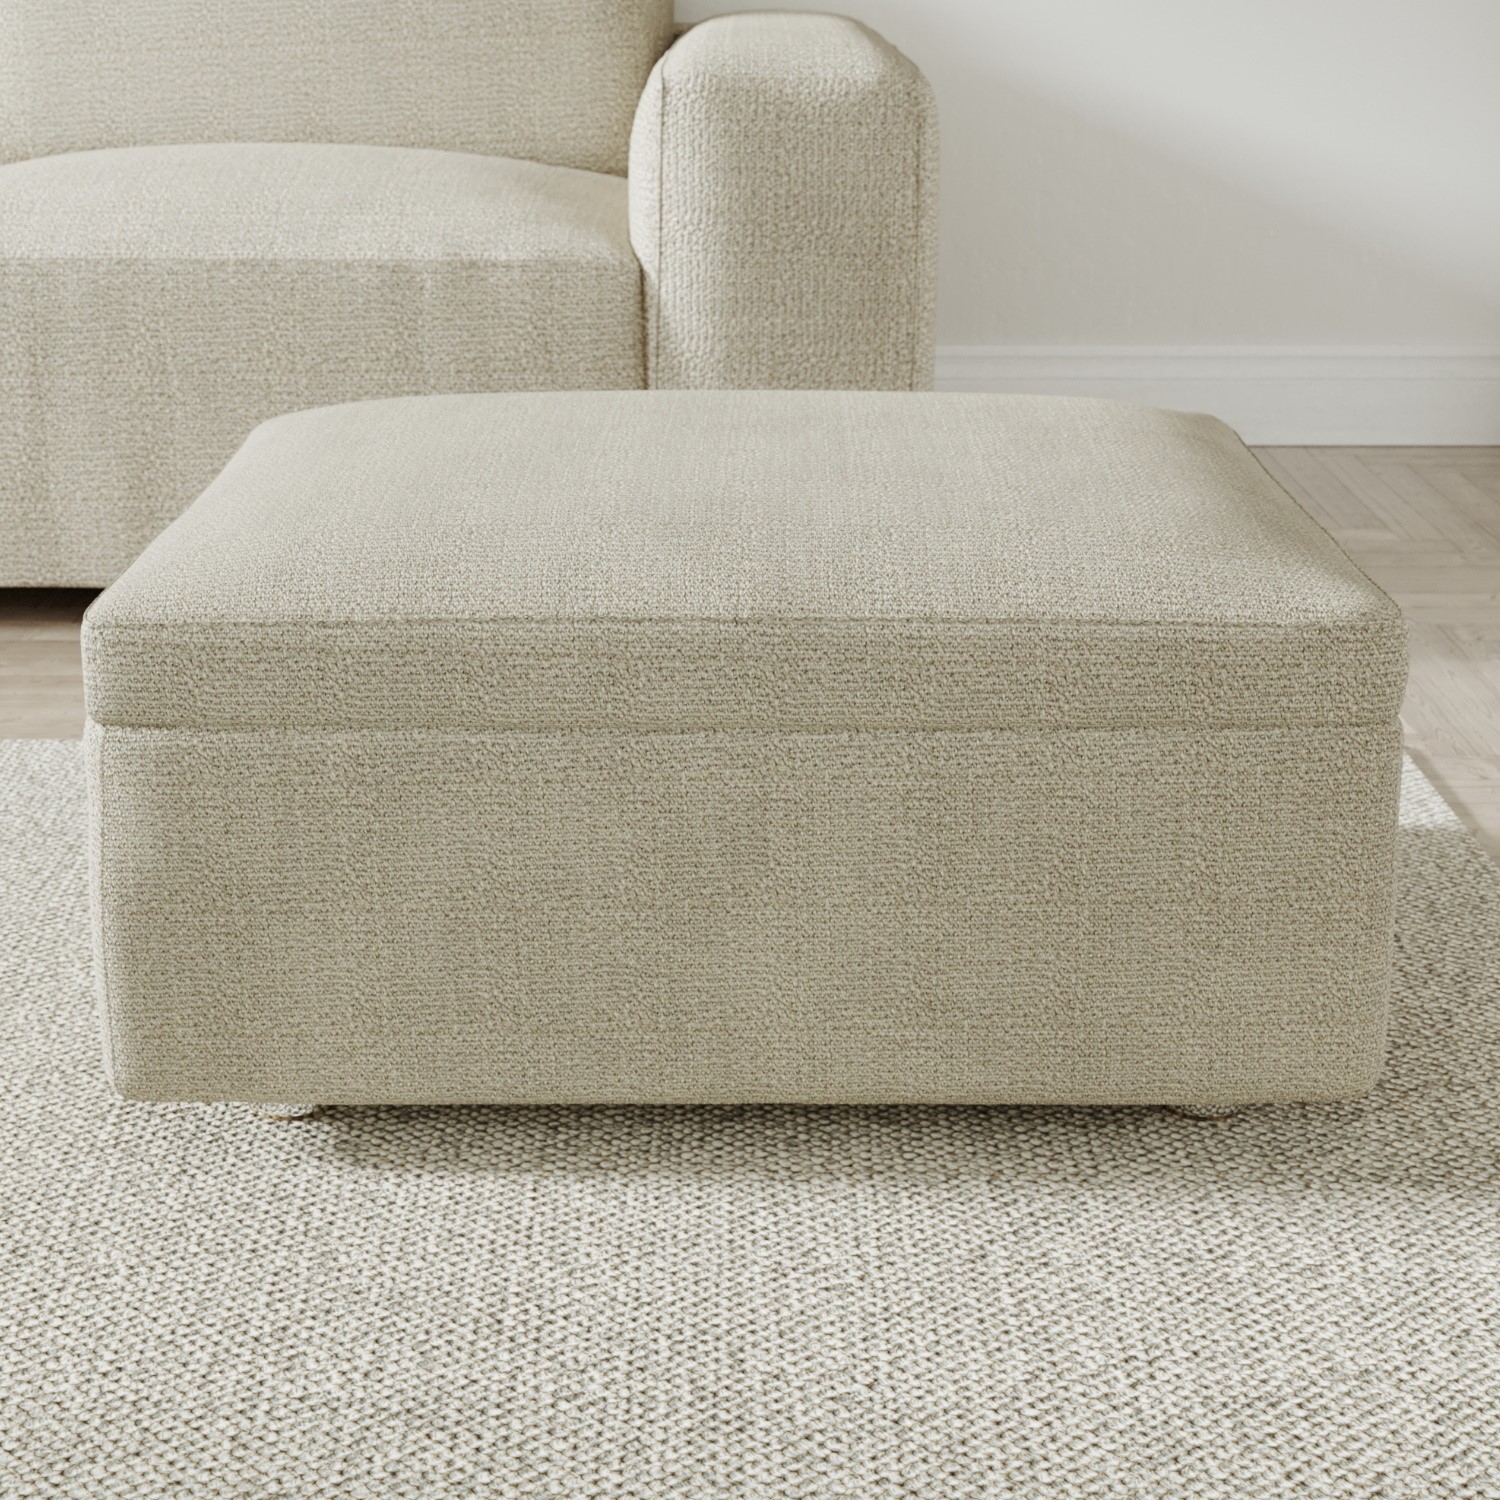 Read more about Large beige fabric footstool with storage kolt